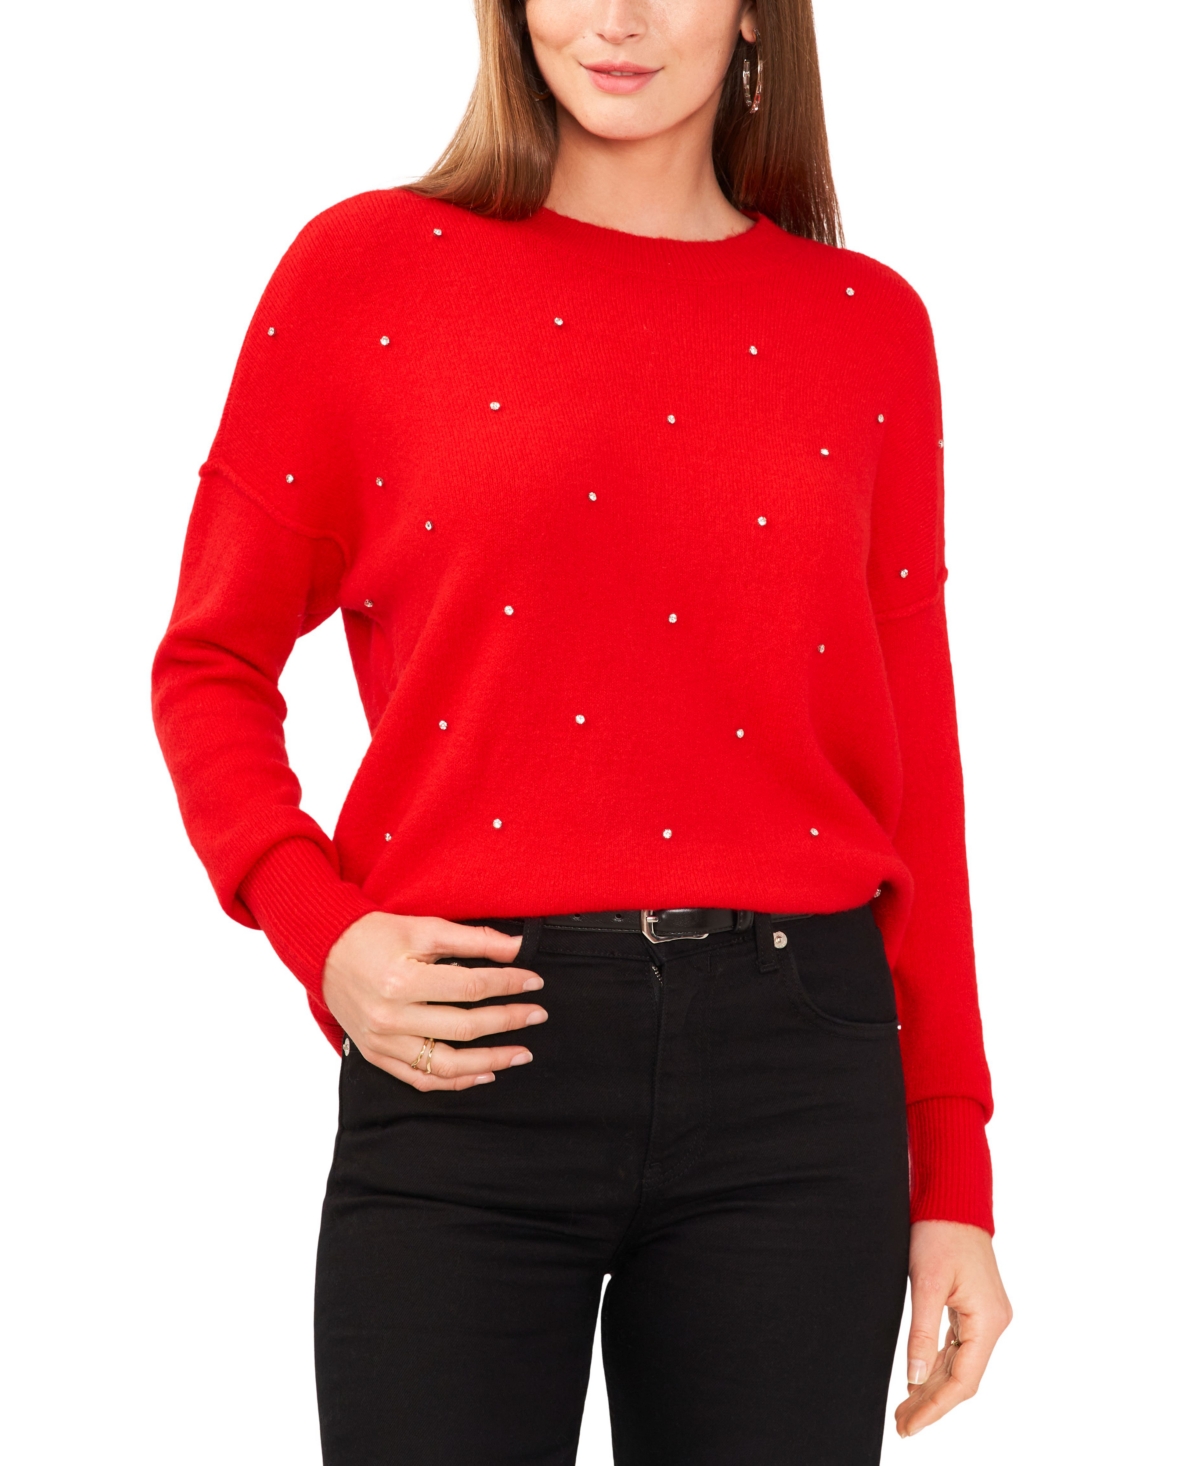 Vince Camuto Women's Rhinestone Studded Drop Shoulder Crewneck Sweater In Bright Cherry